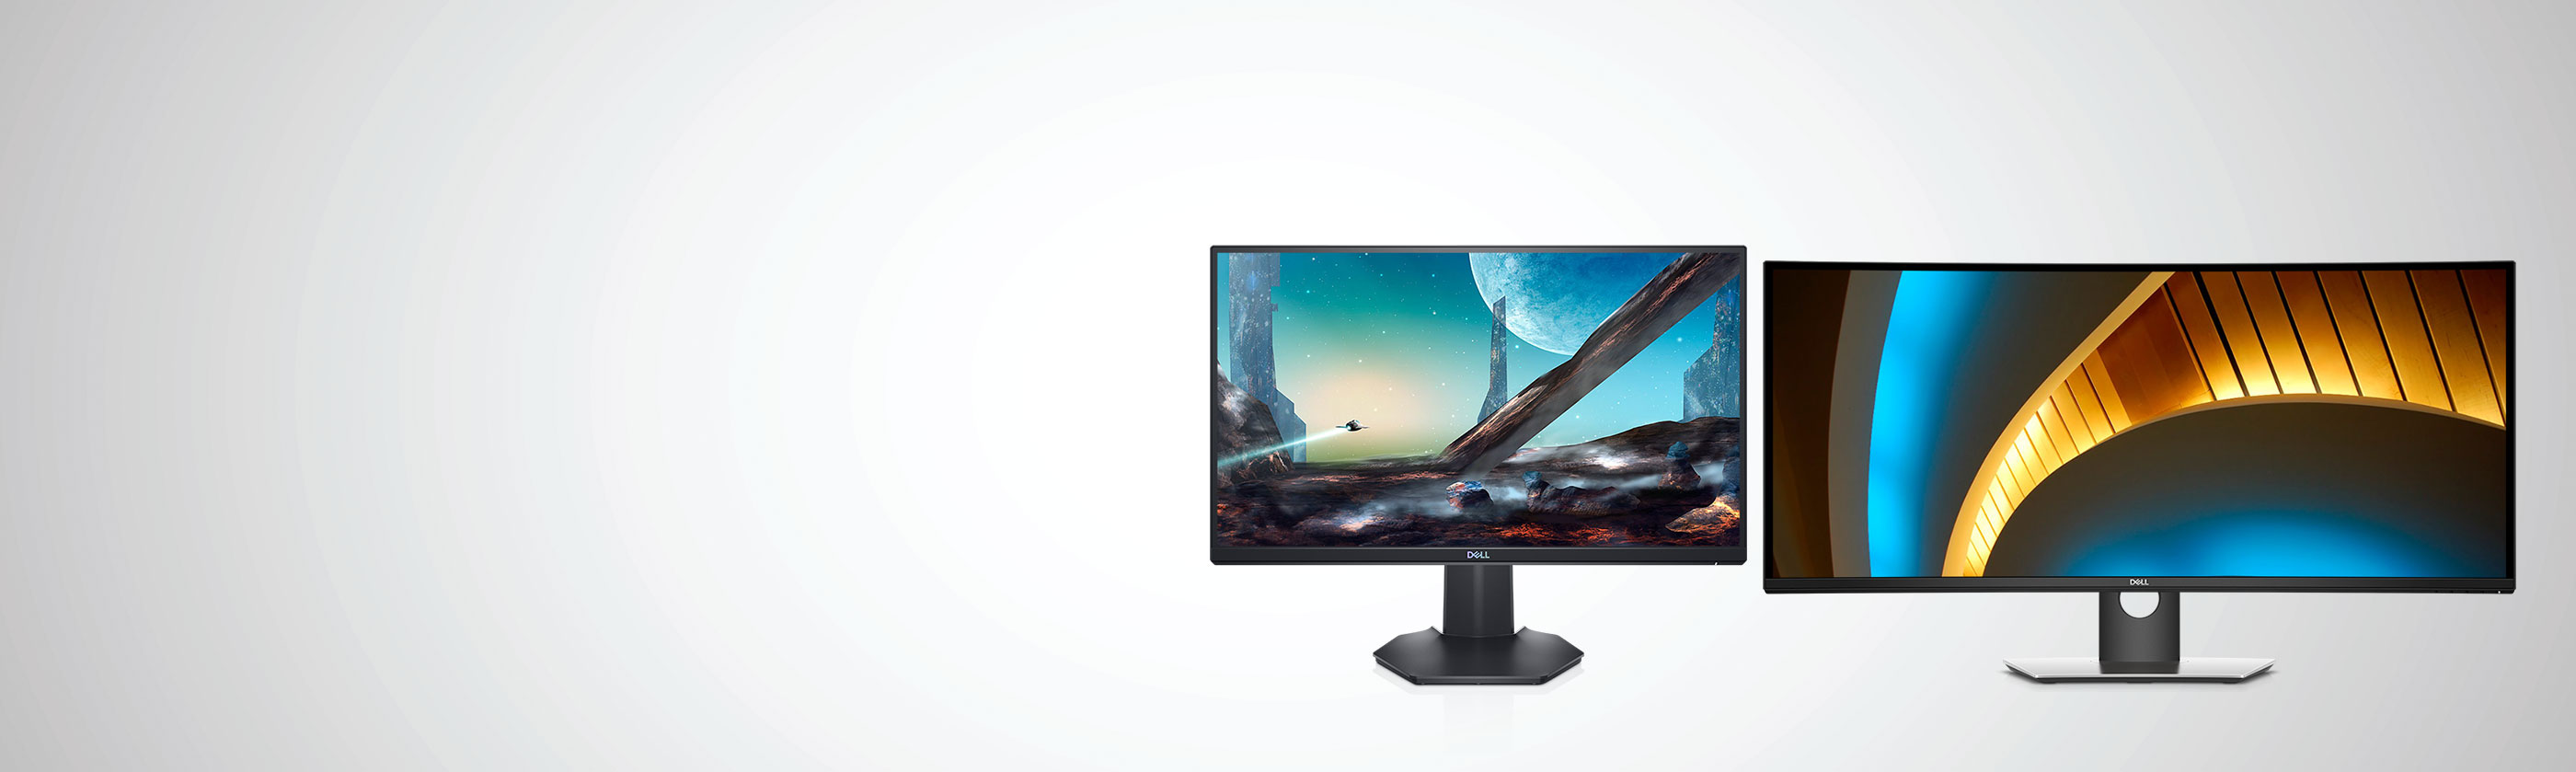 Dell Monitor Buying Guide